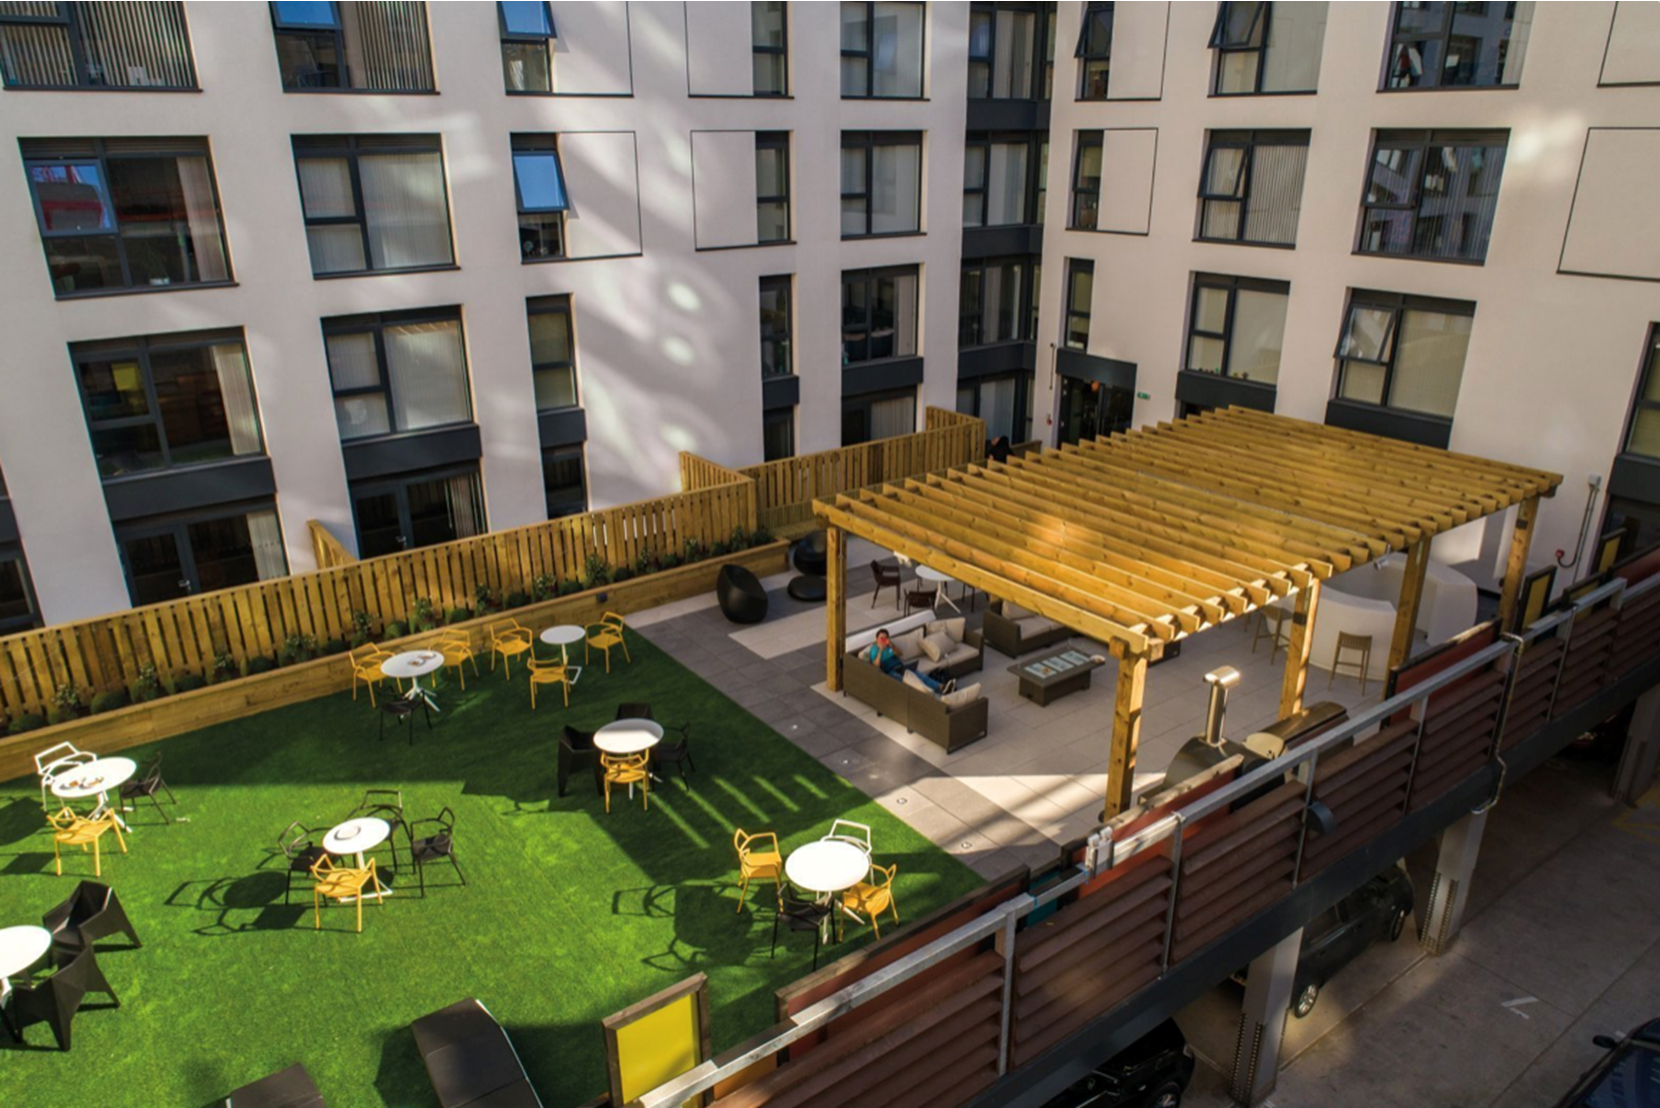 Apartments to Rent by Touchstone Resi in The Forum, Birmingham, B5, communal terrace space